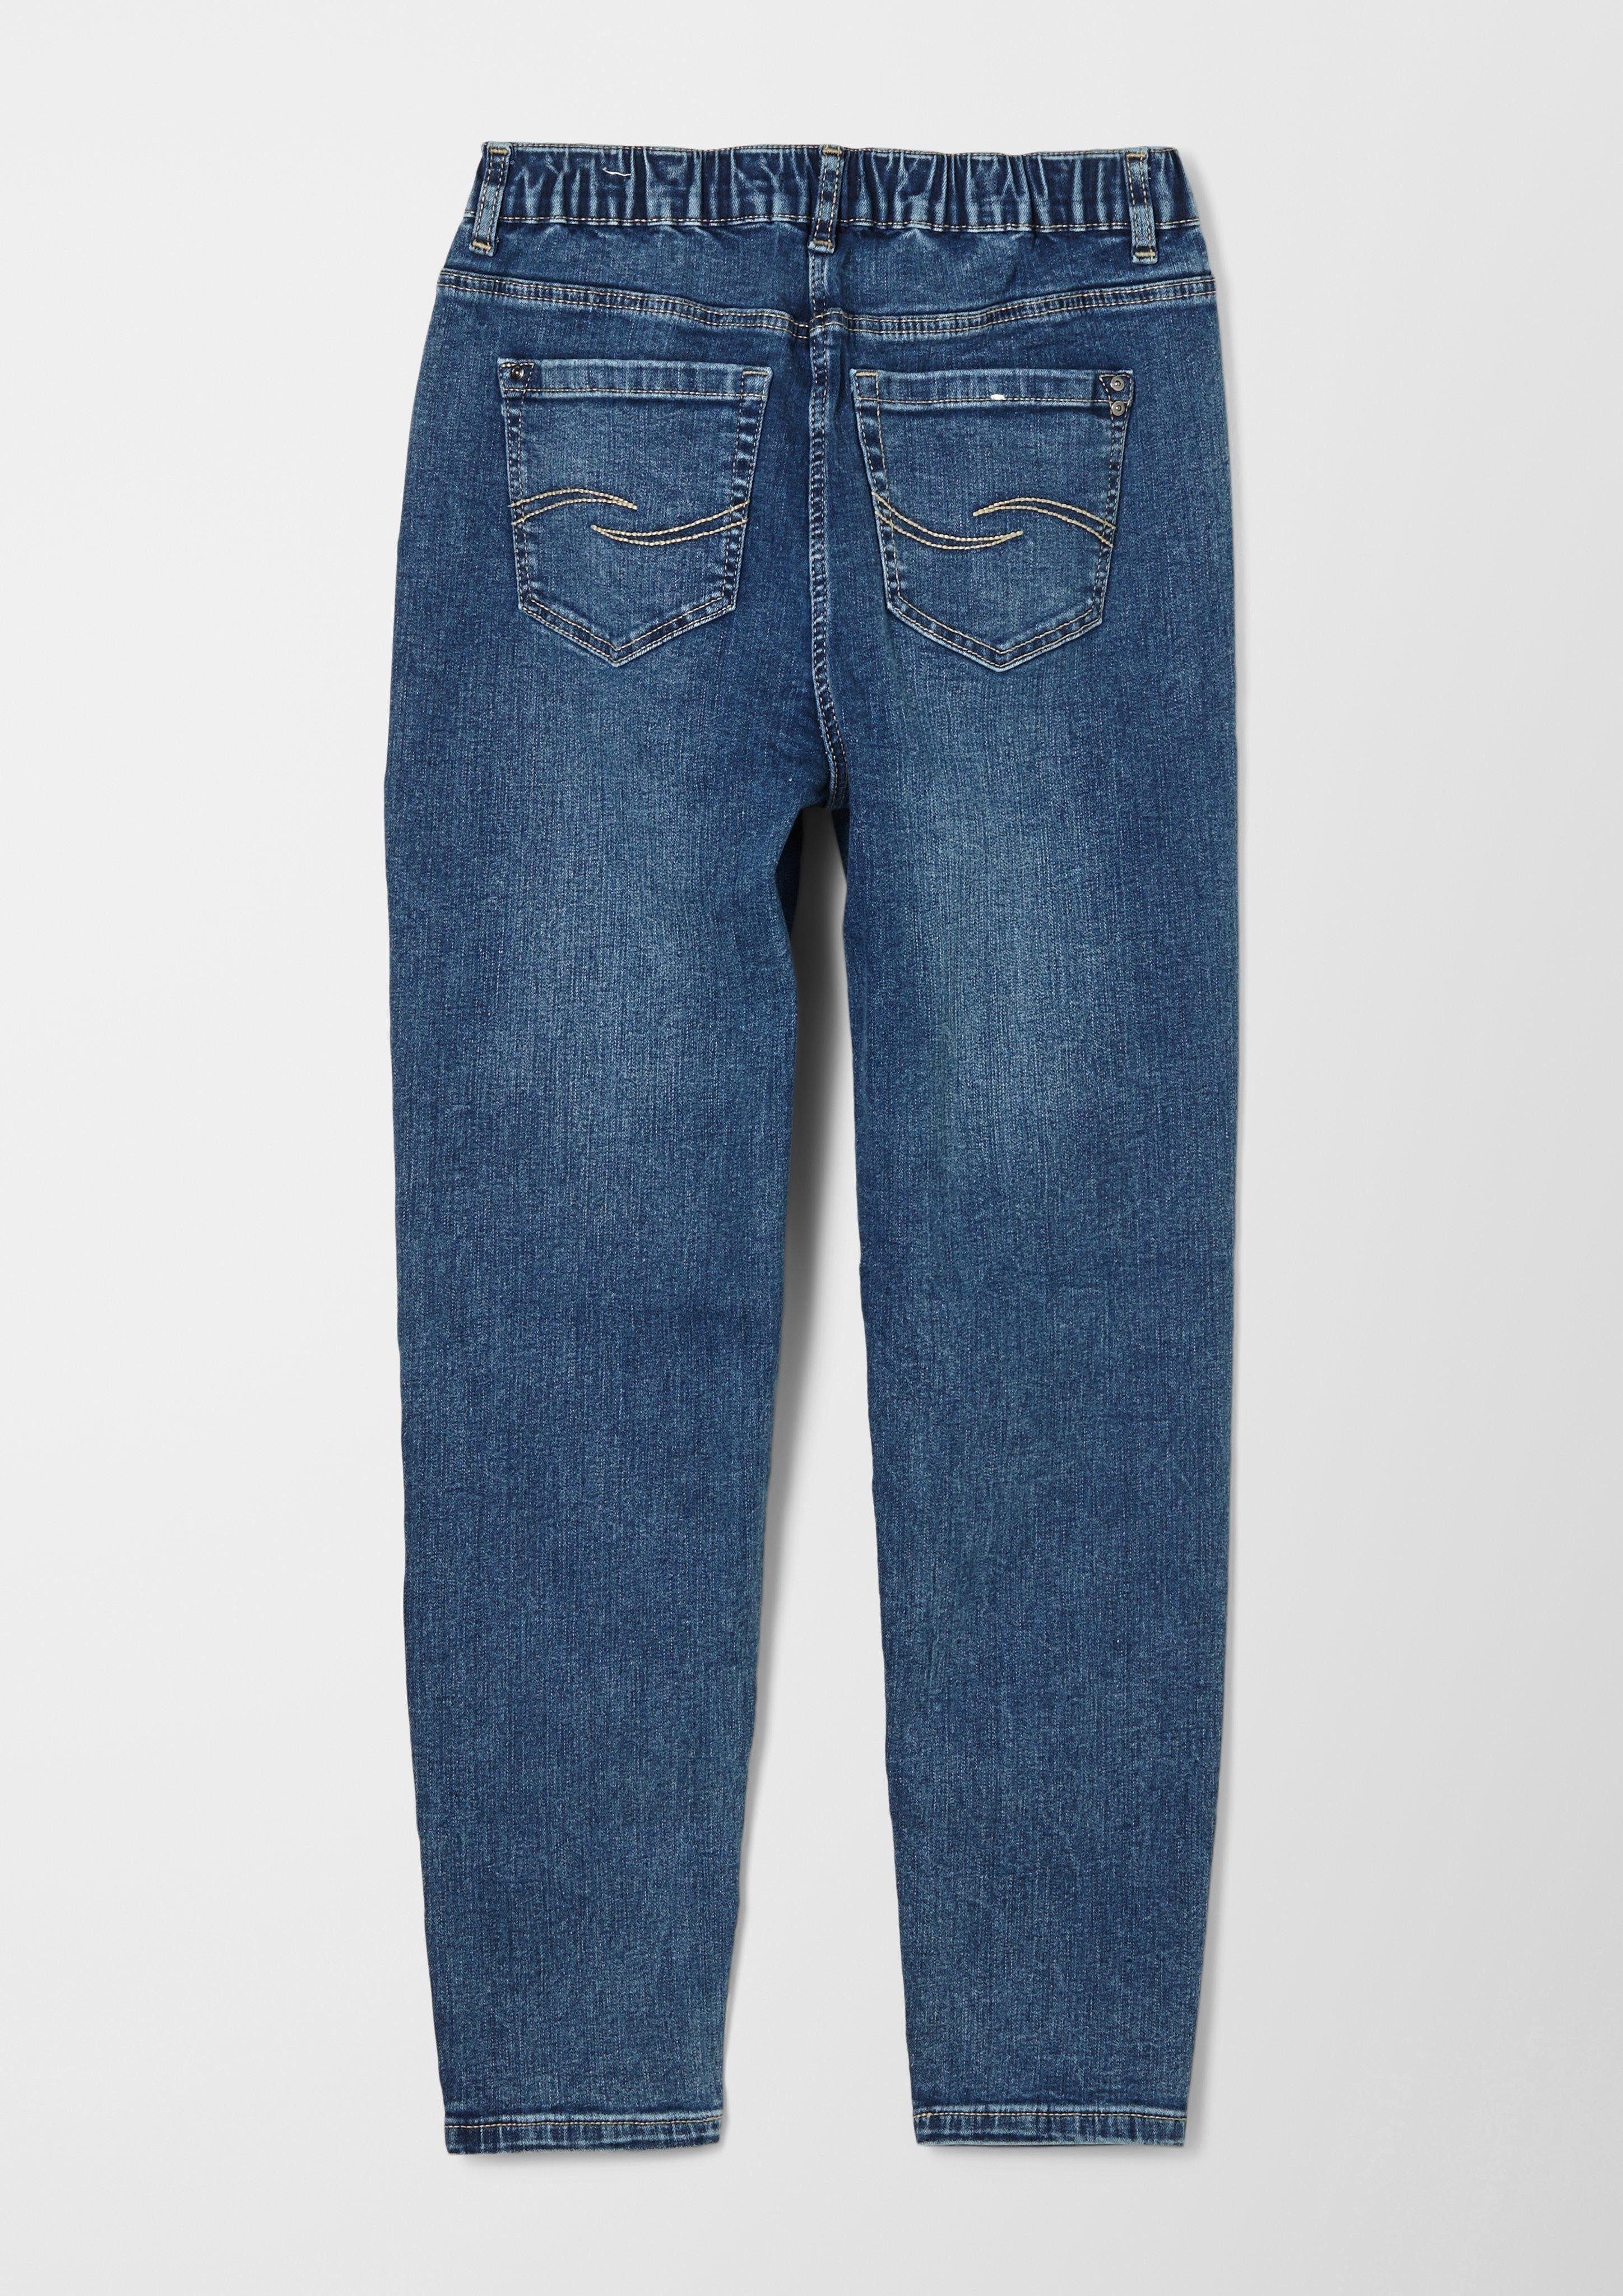 High Stoffhose Relaxed Ankle-Jeans Tapered s.Oliver / Mom Waschung Leg / Fit Rise /